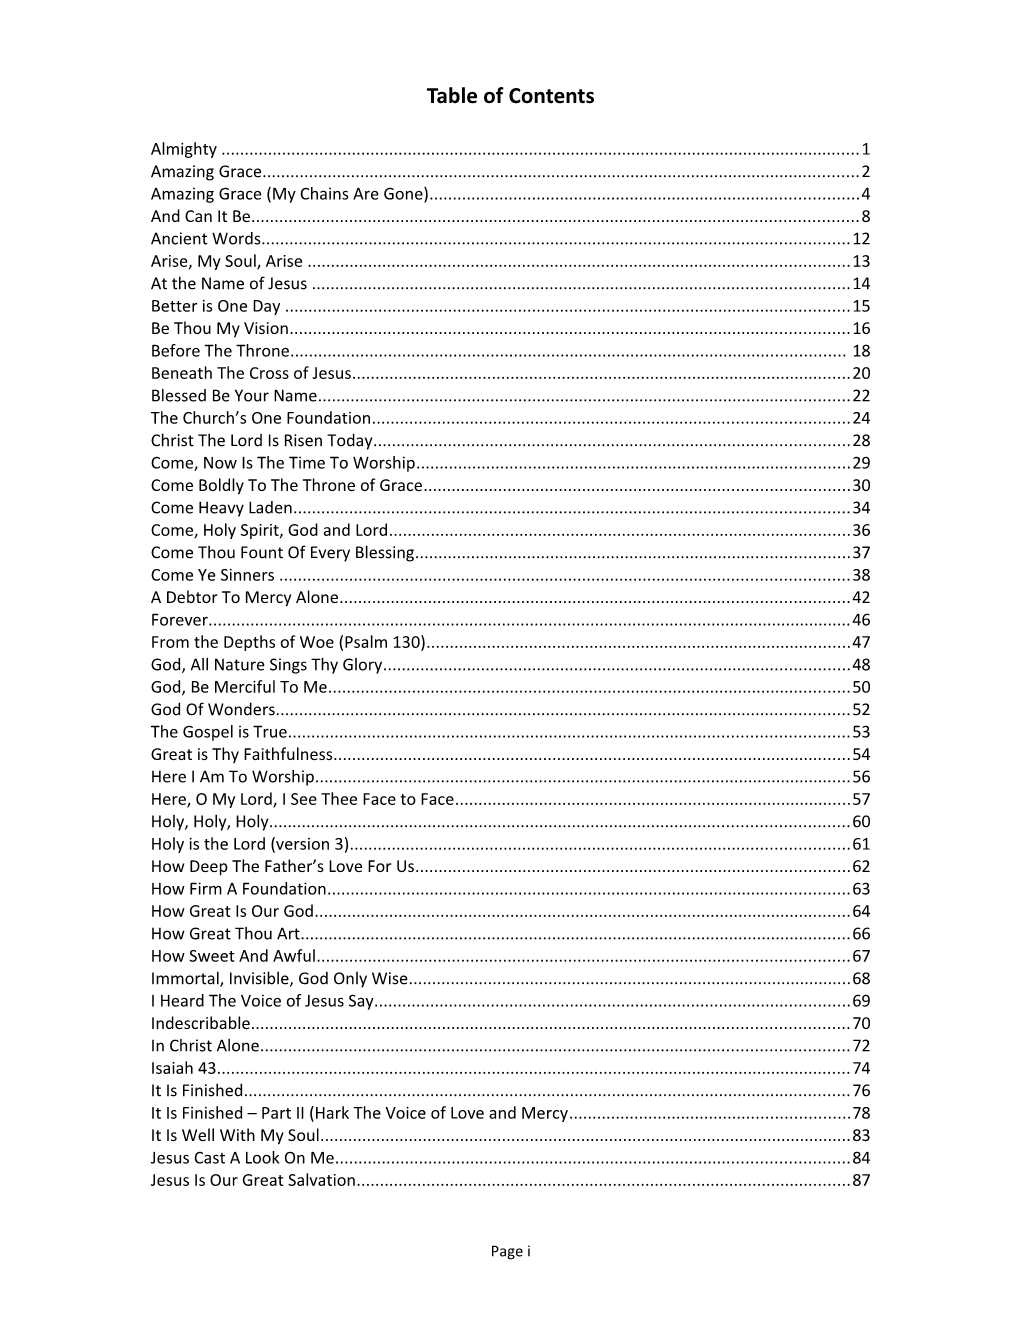 Table of Contents s230